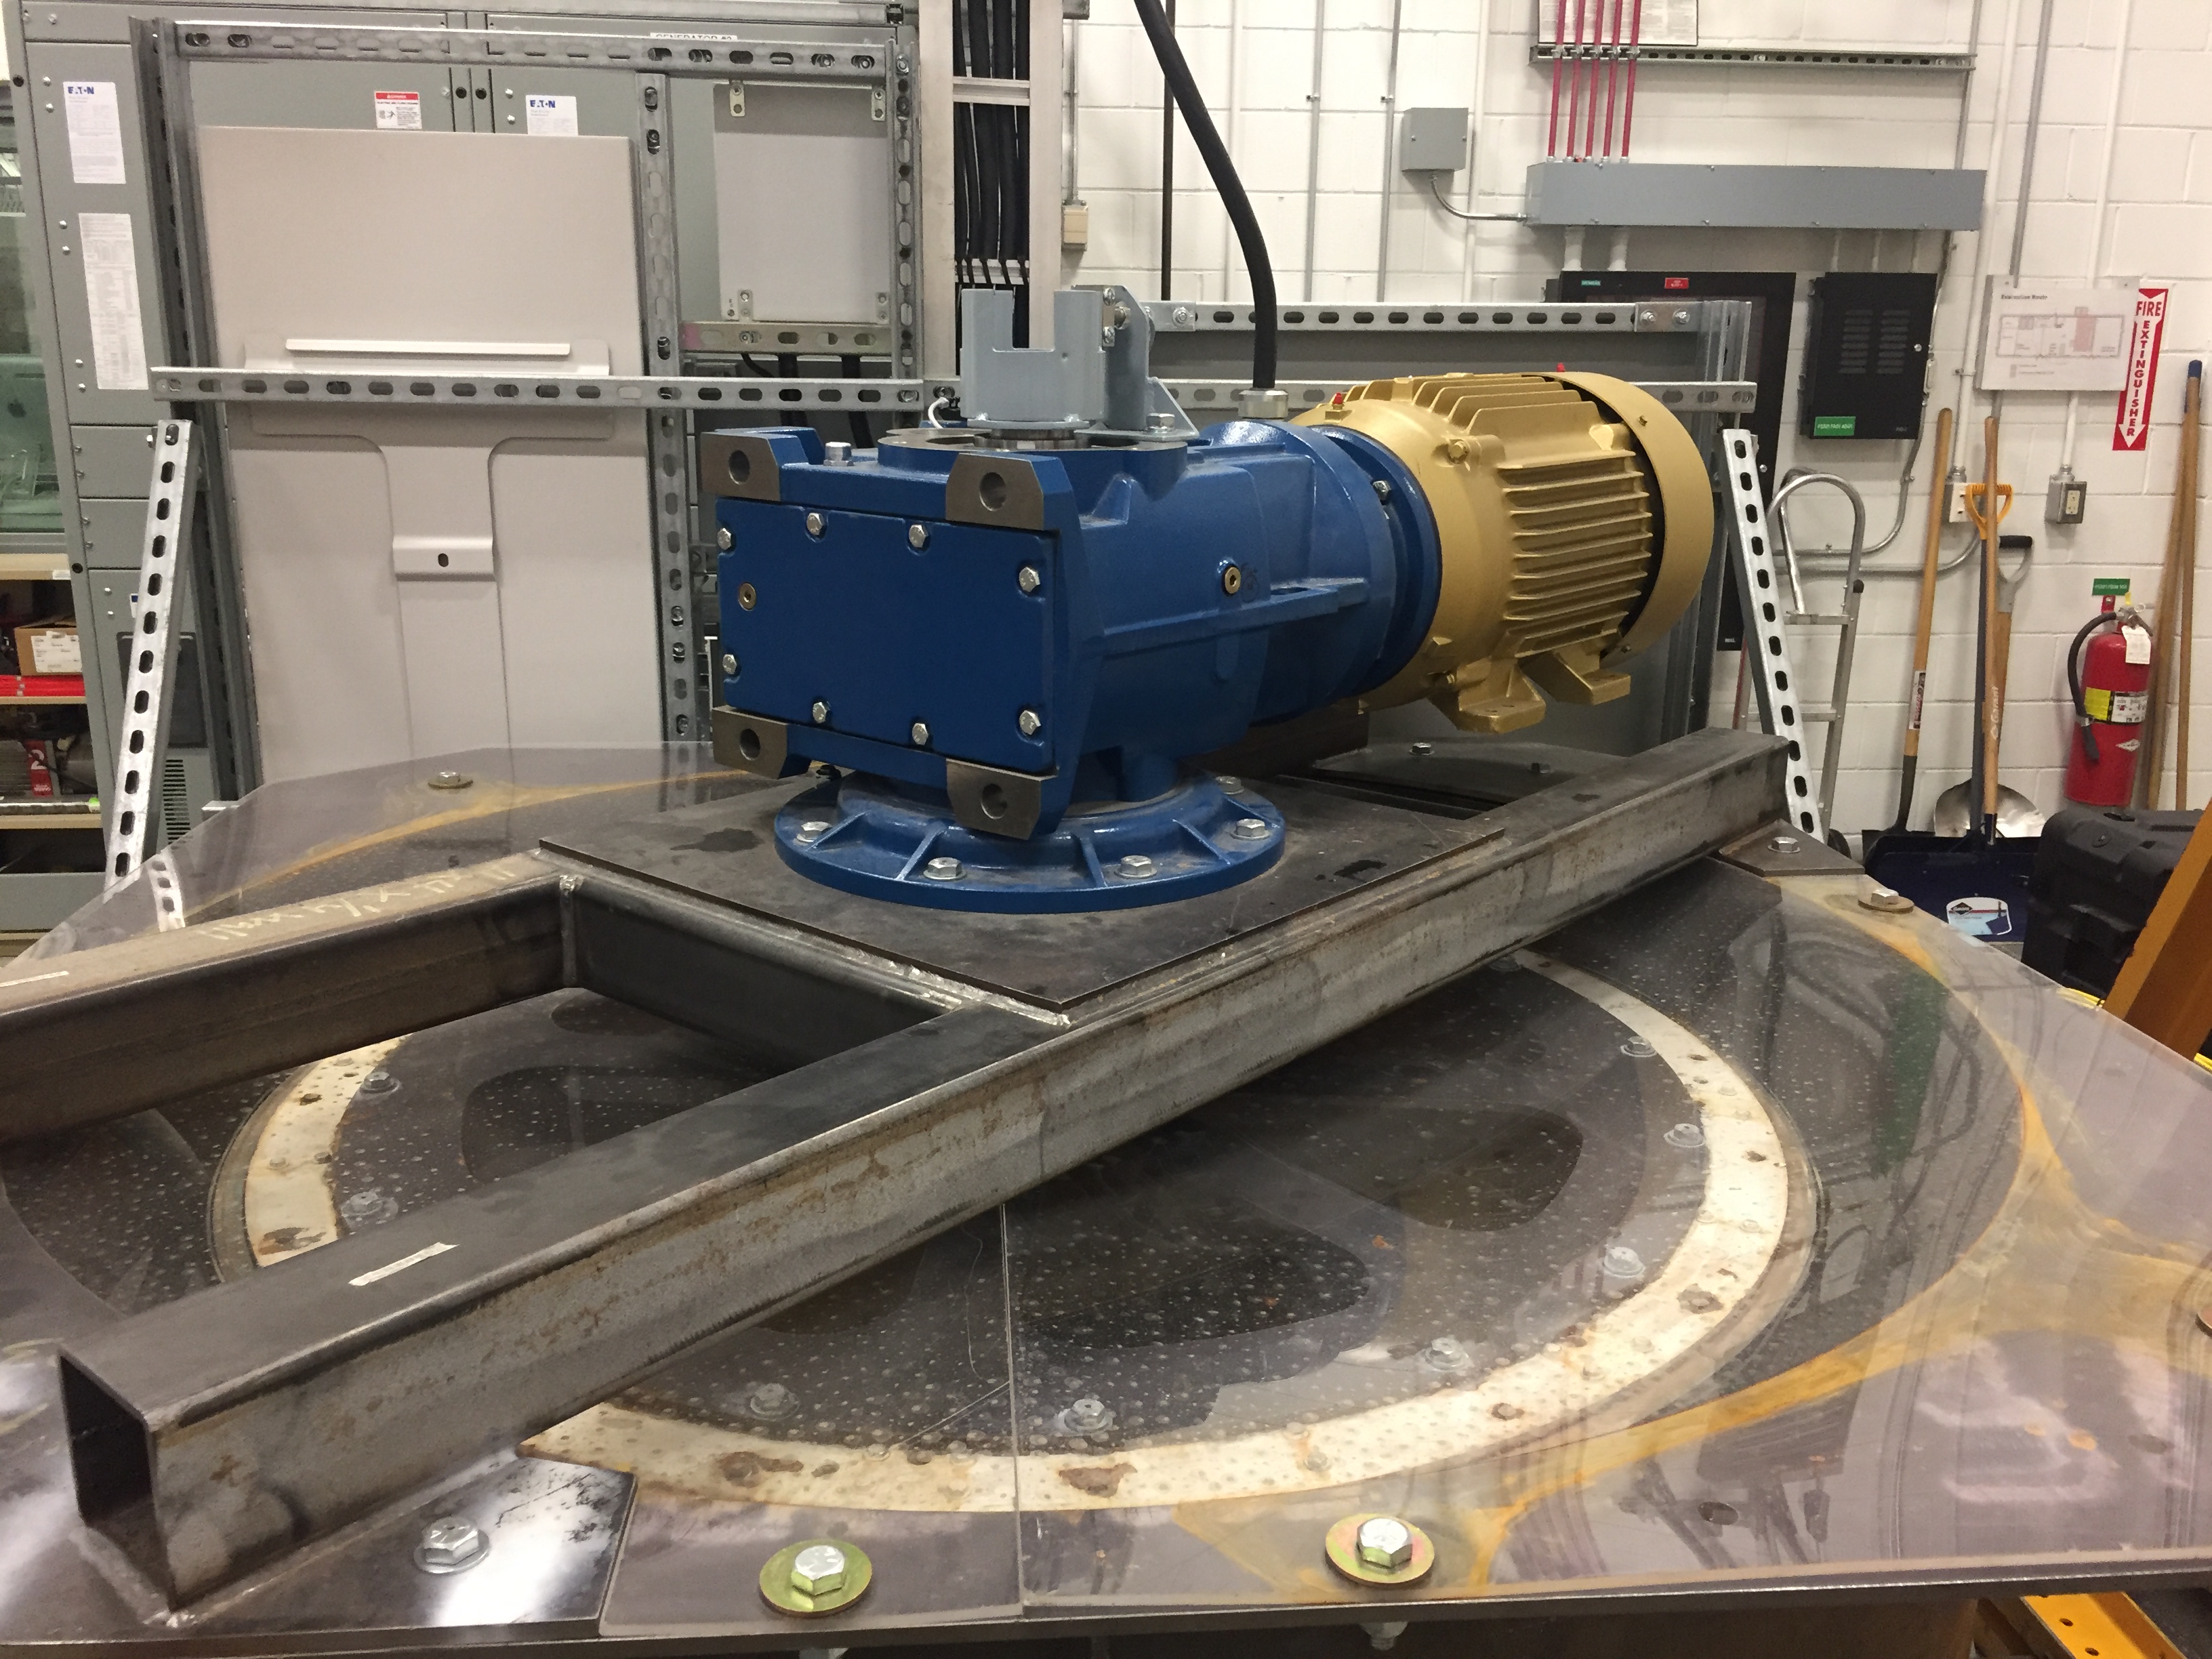 Oceana Turbine Testing Continued in the PSI Lab